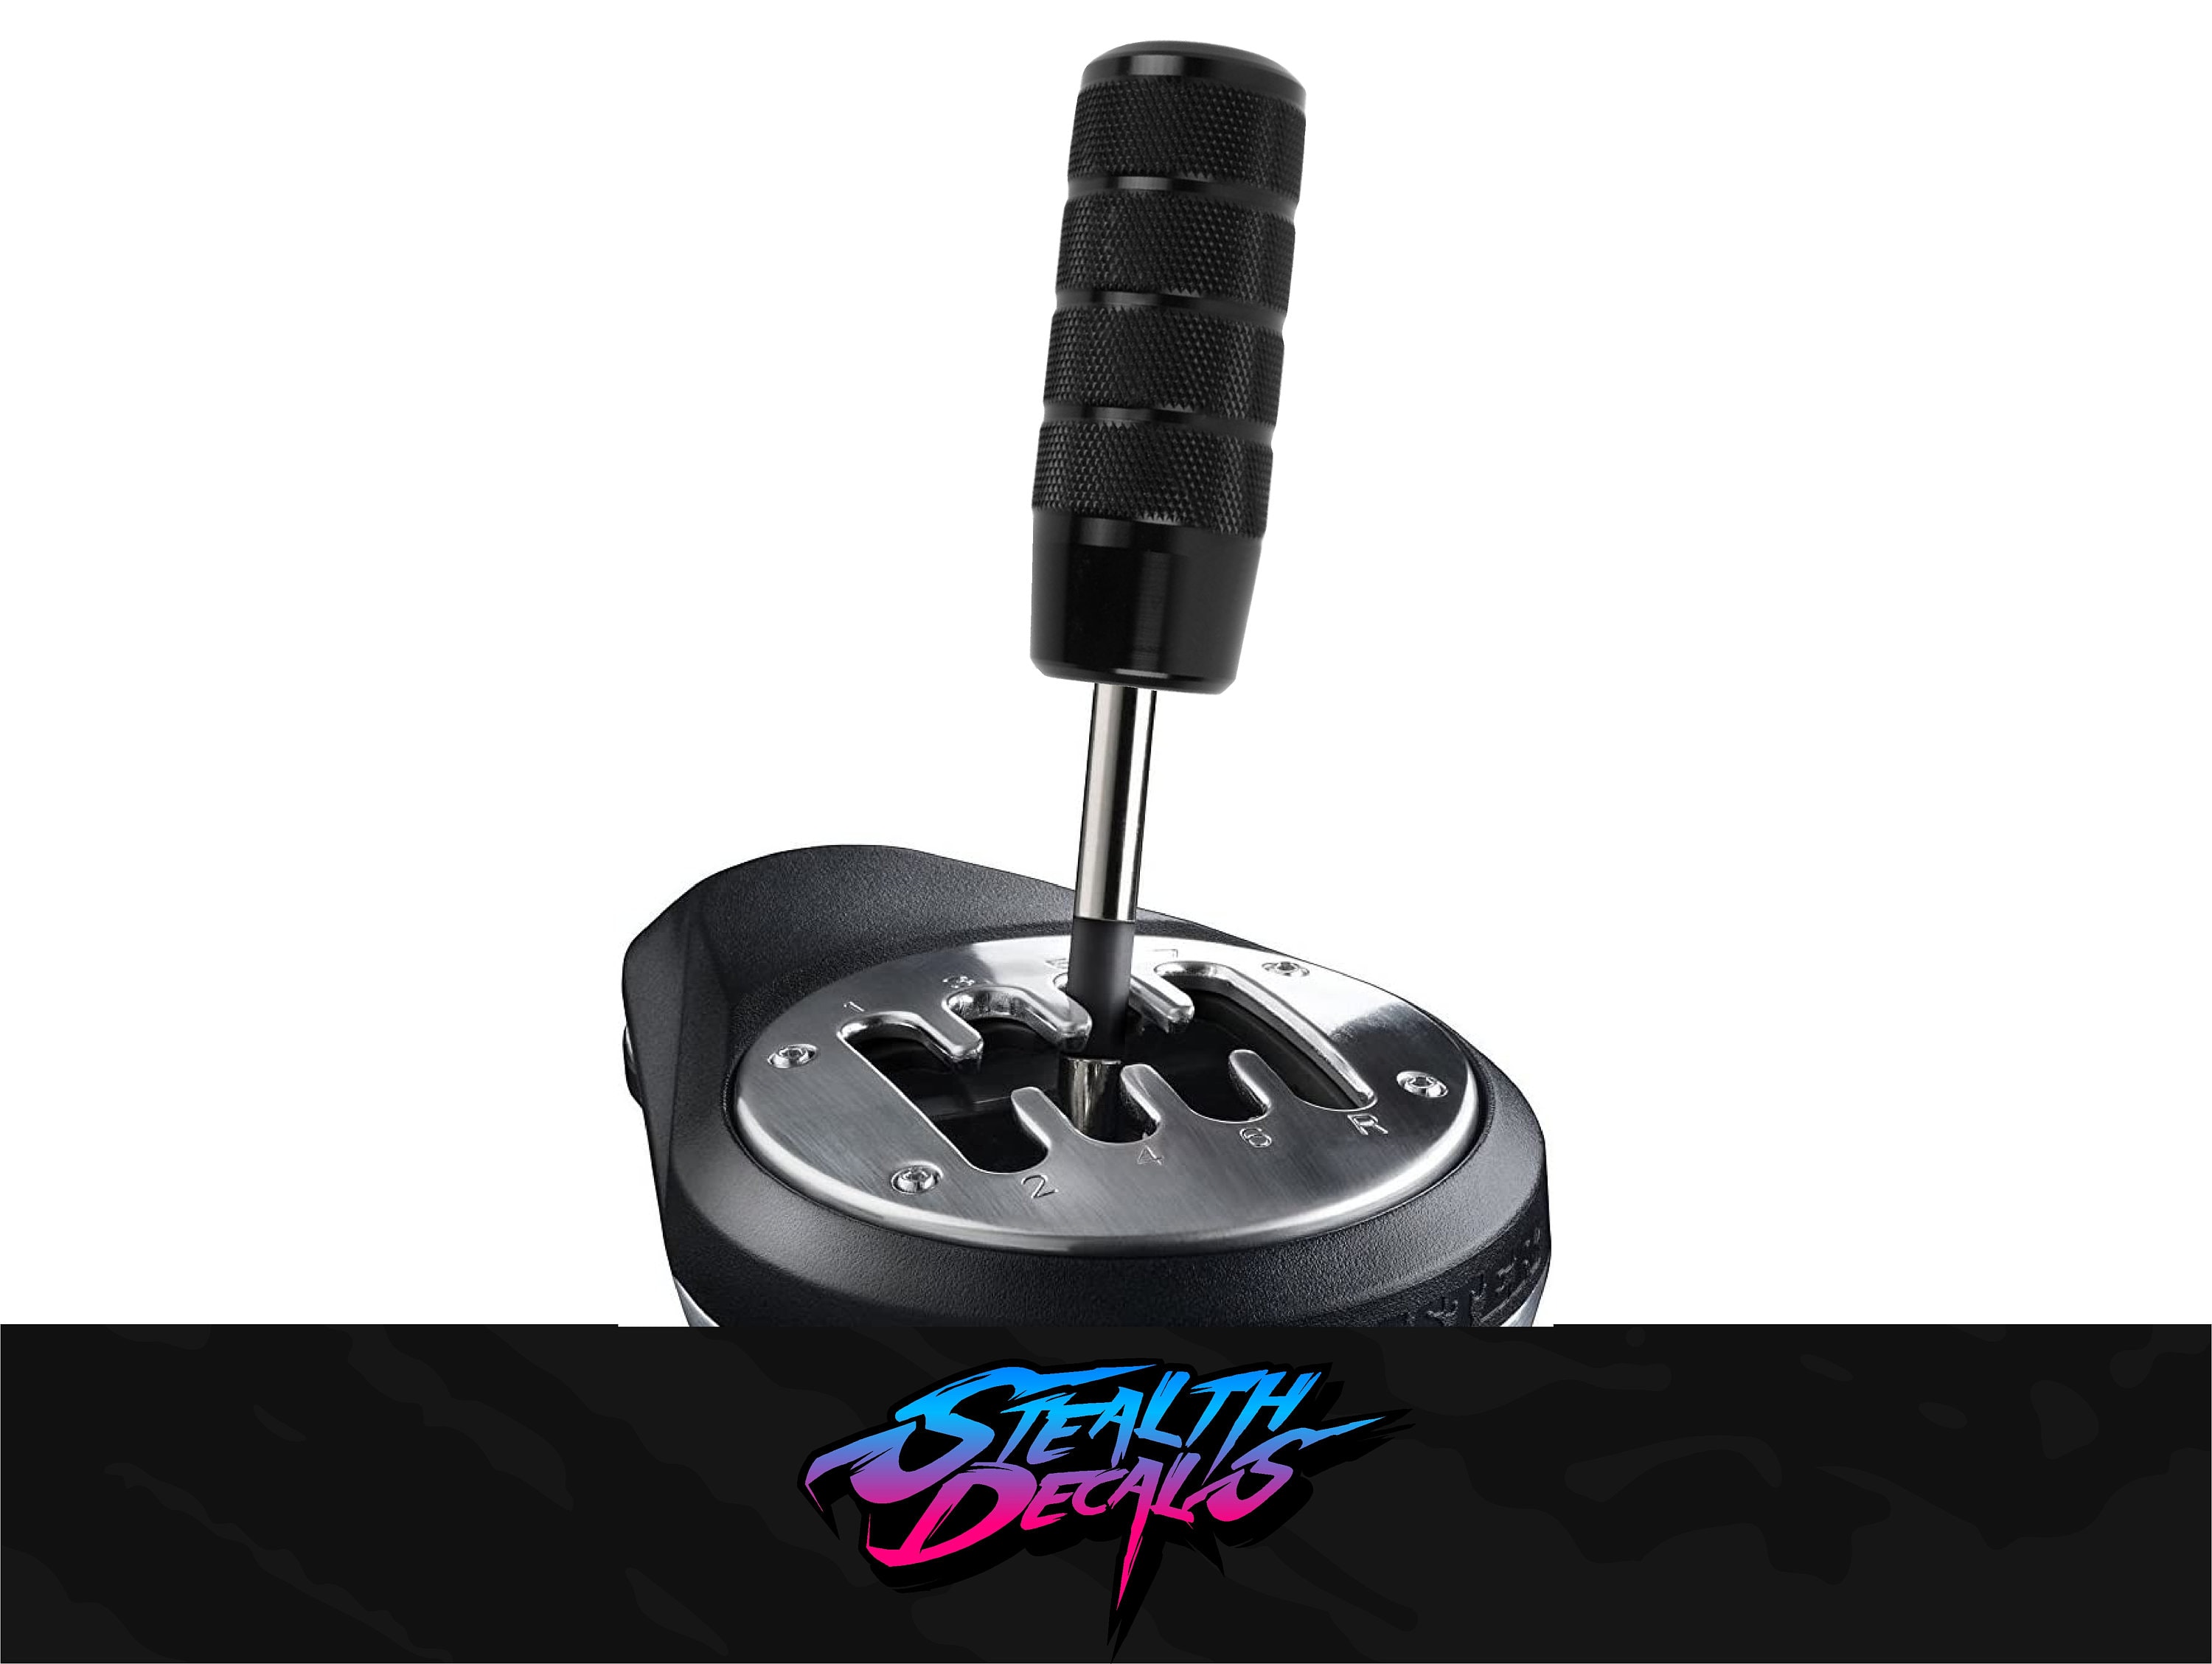 NEW POMO Gear Knob shifter mod upgrade for Thrustmaster TH8S